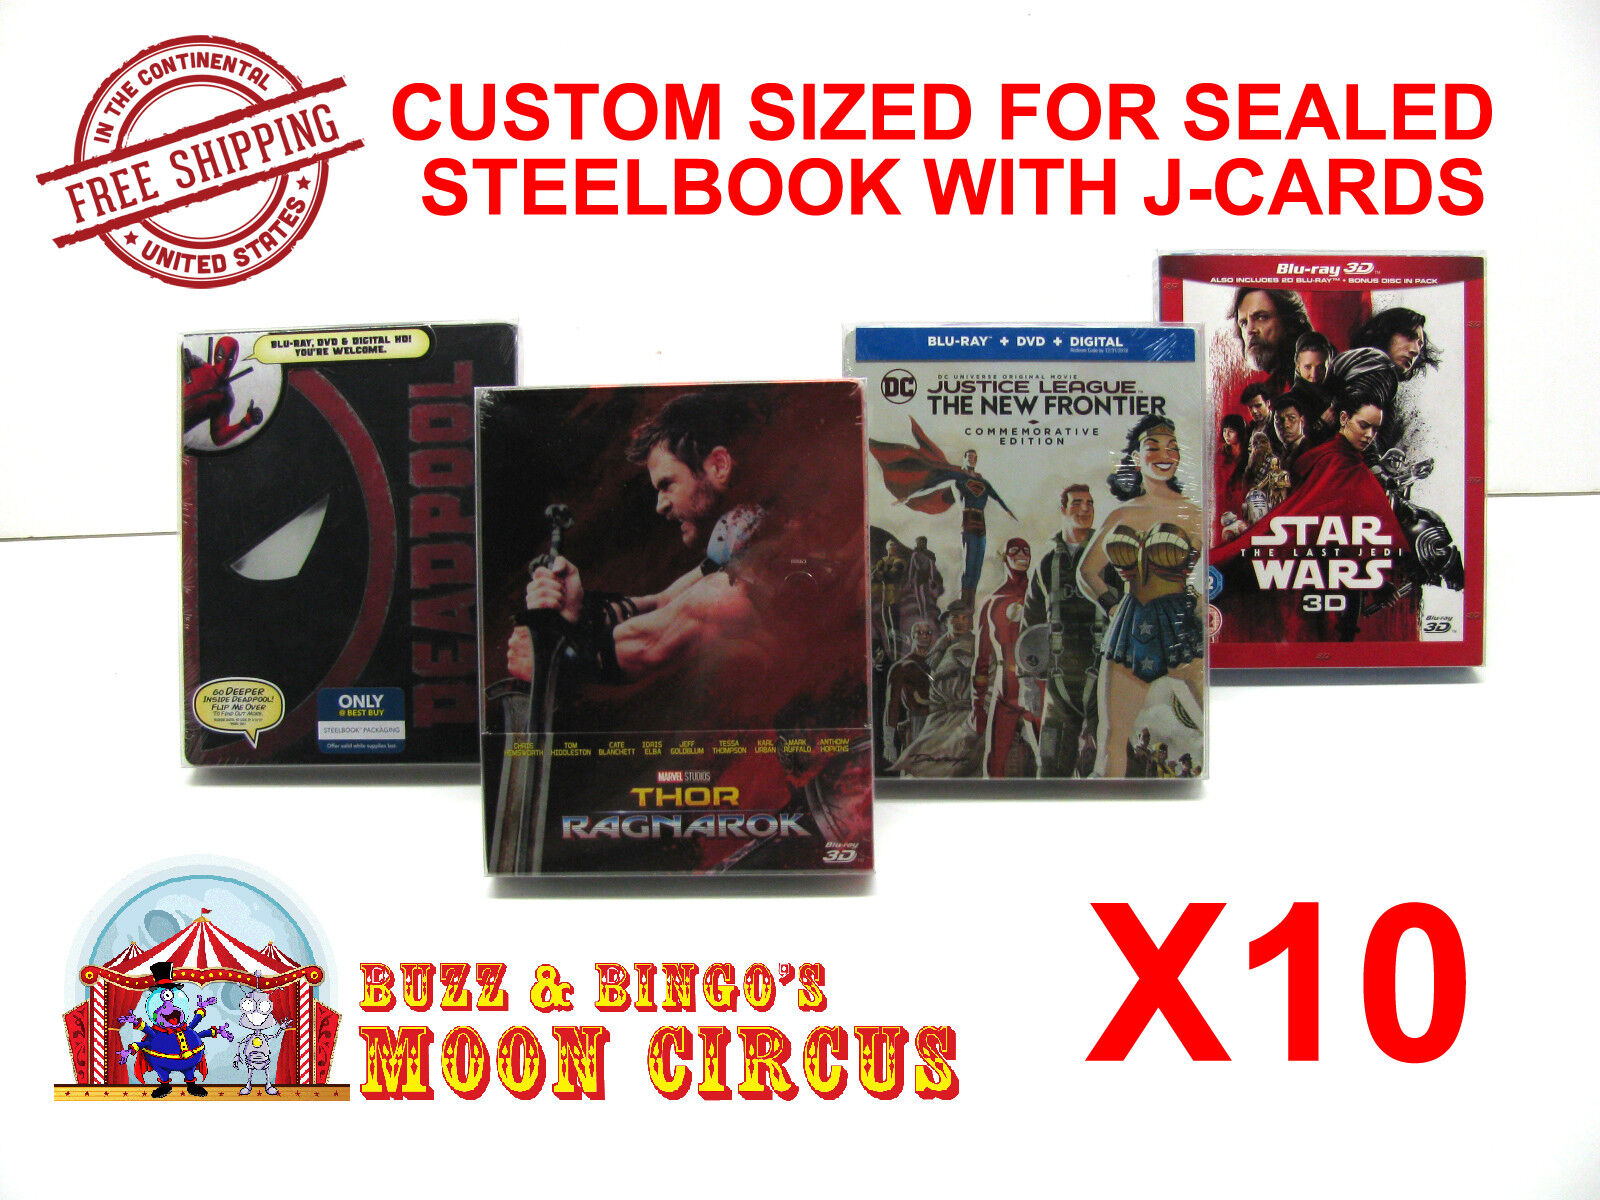 10x BLU-RAY STEELBOOK WITH J-CARDS (SIZE BR5) - CLEAR PLASTIC BOX PROTECTORS